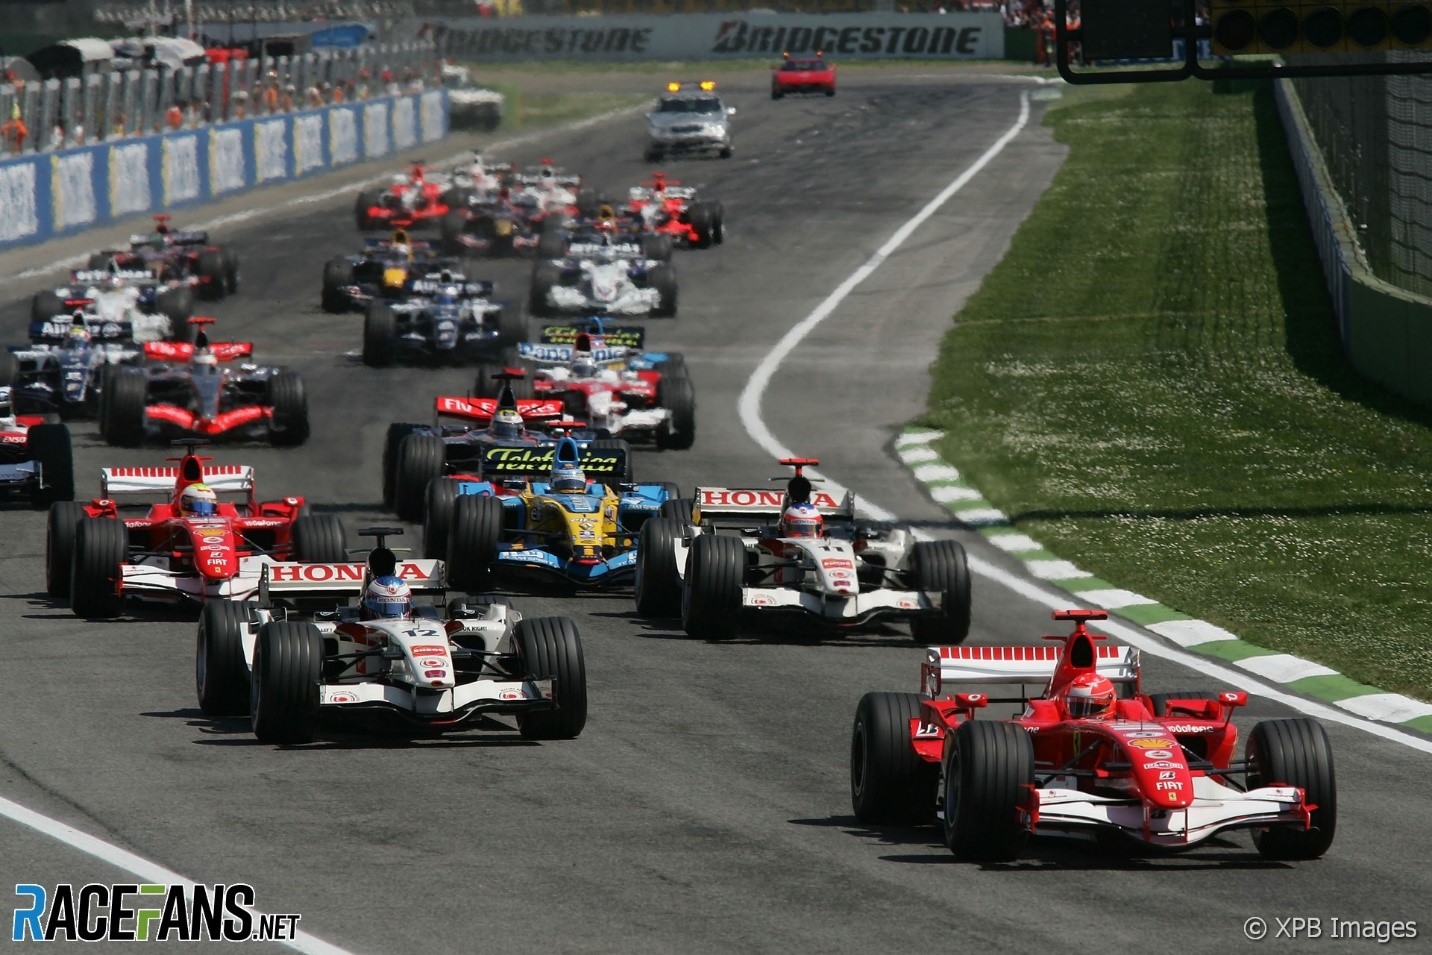 A F1 race at Imola.